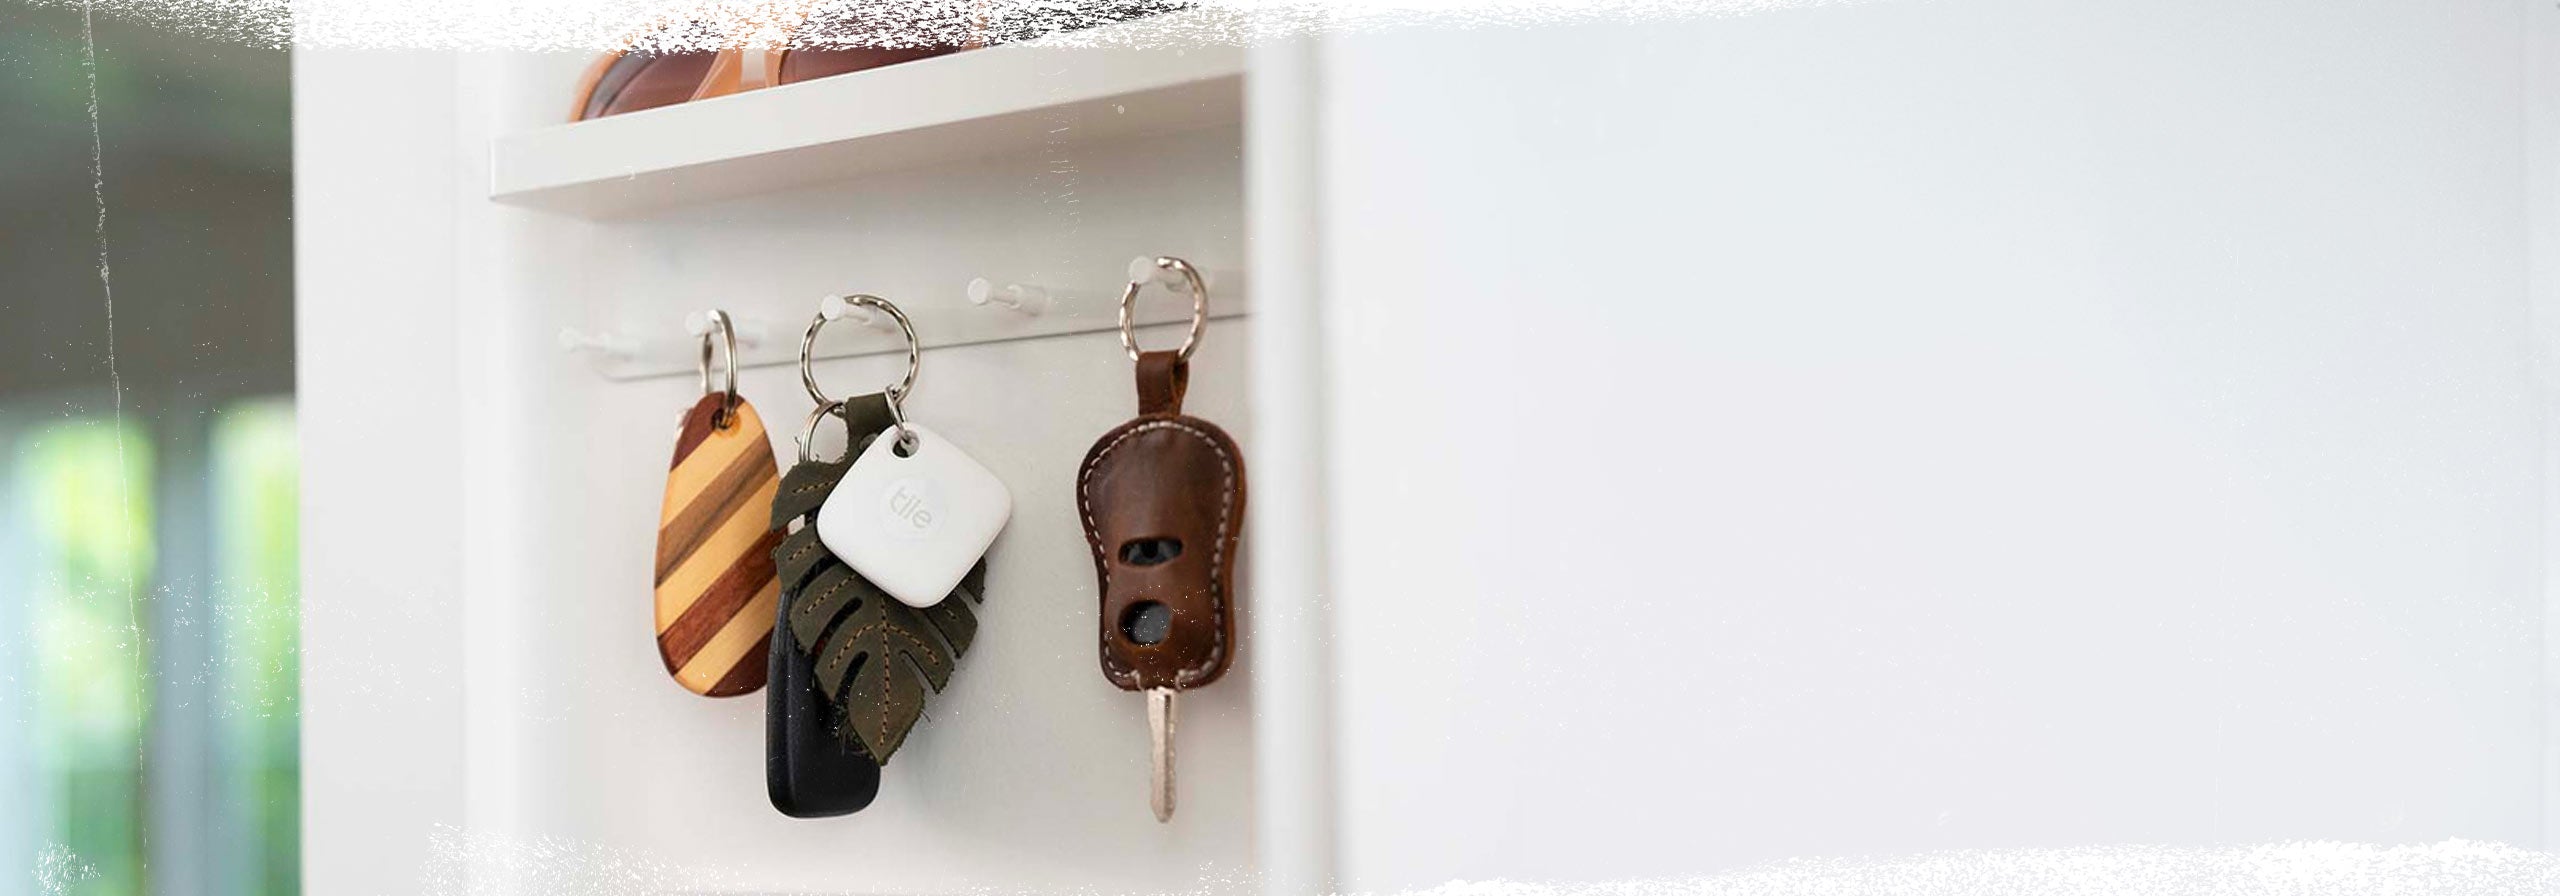 Key and Wallet Tracking Device hanging